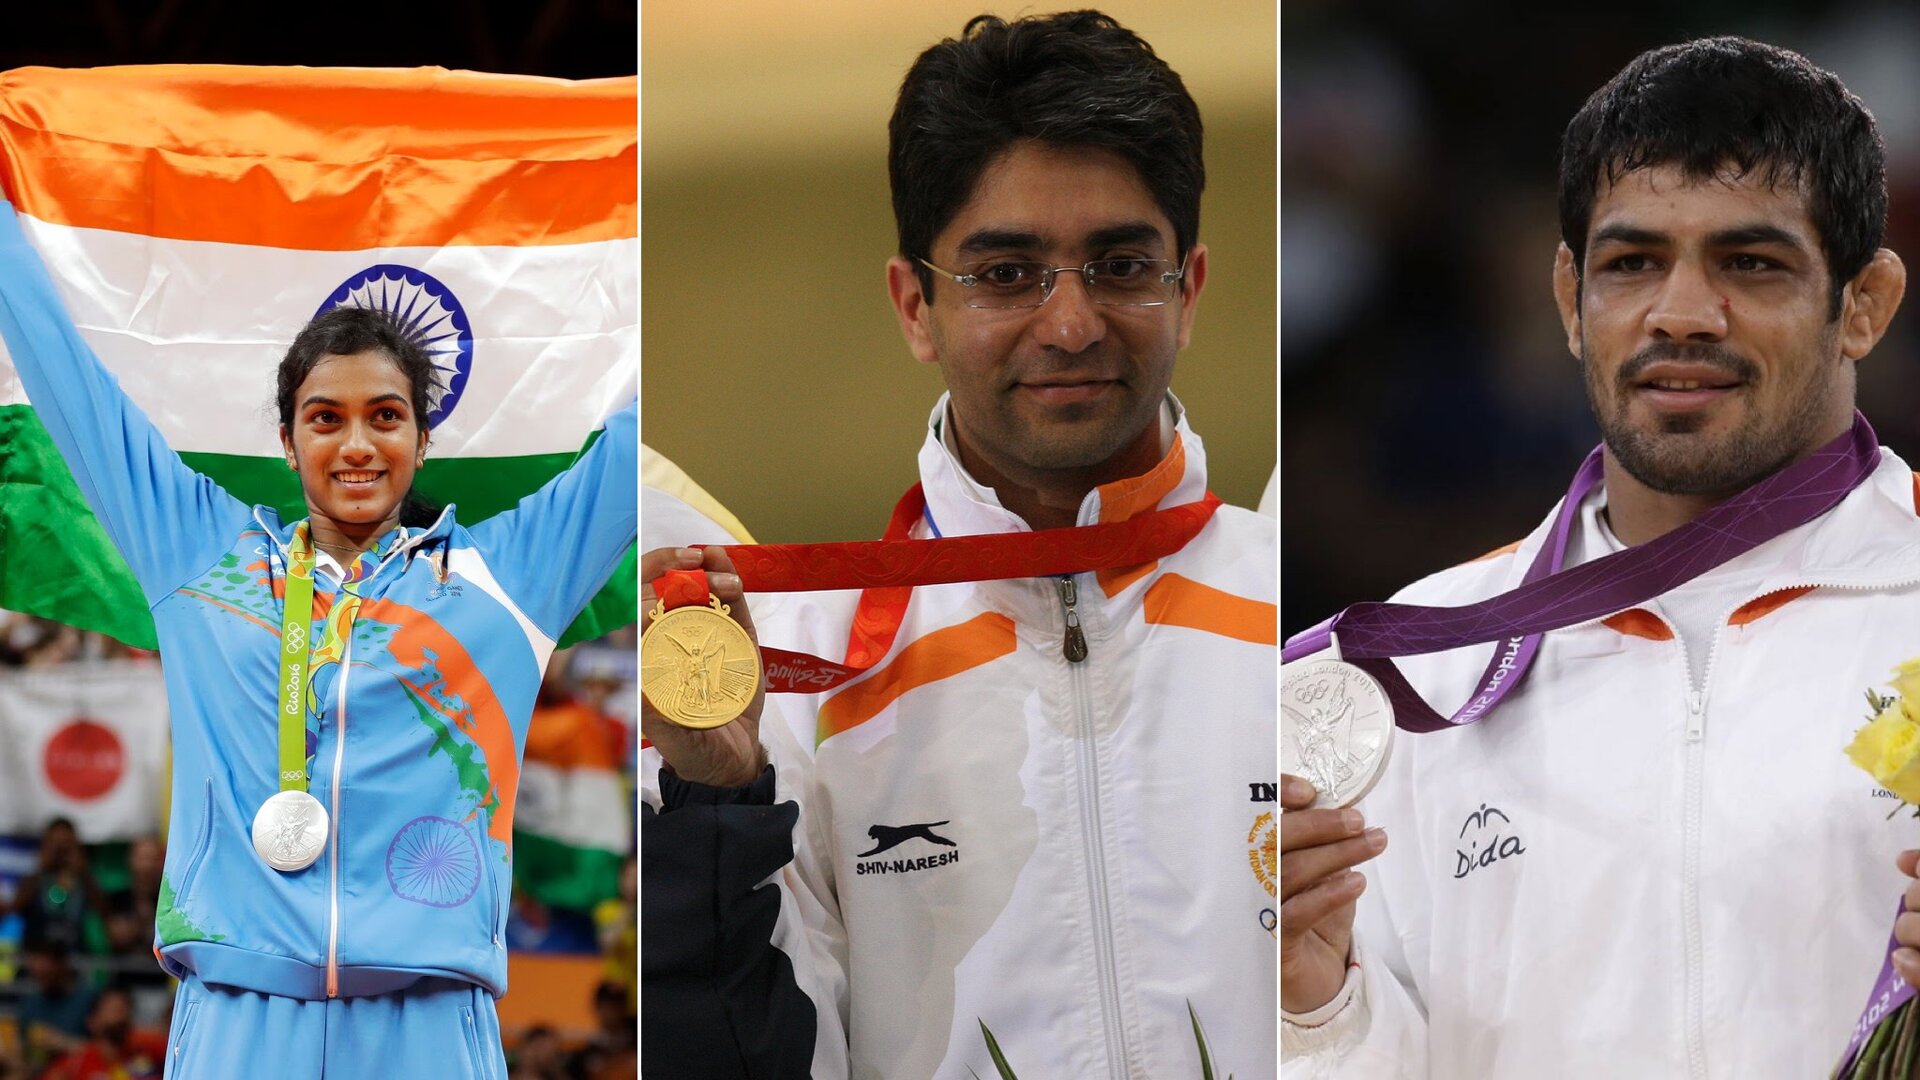 India first gold medal in olympics